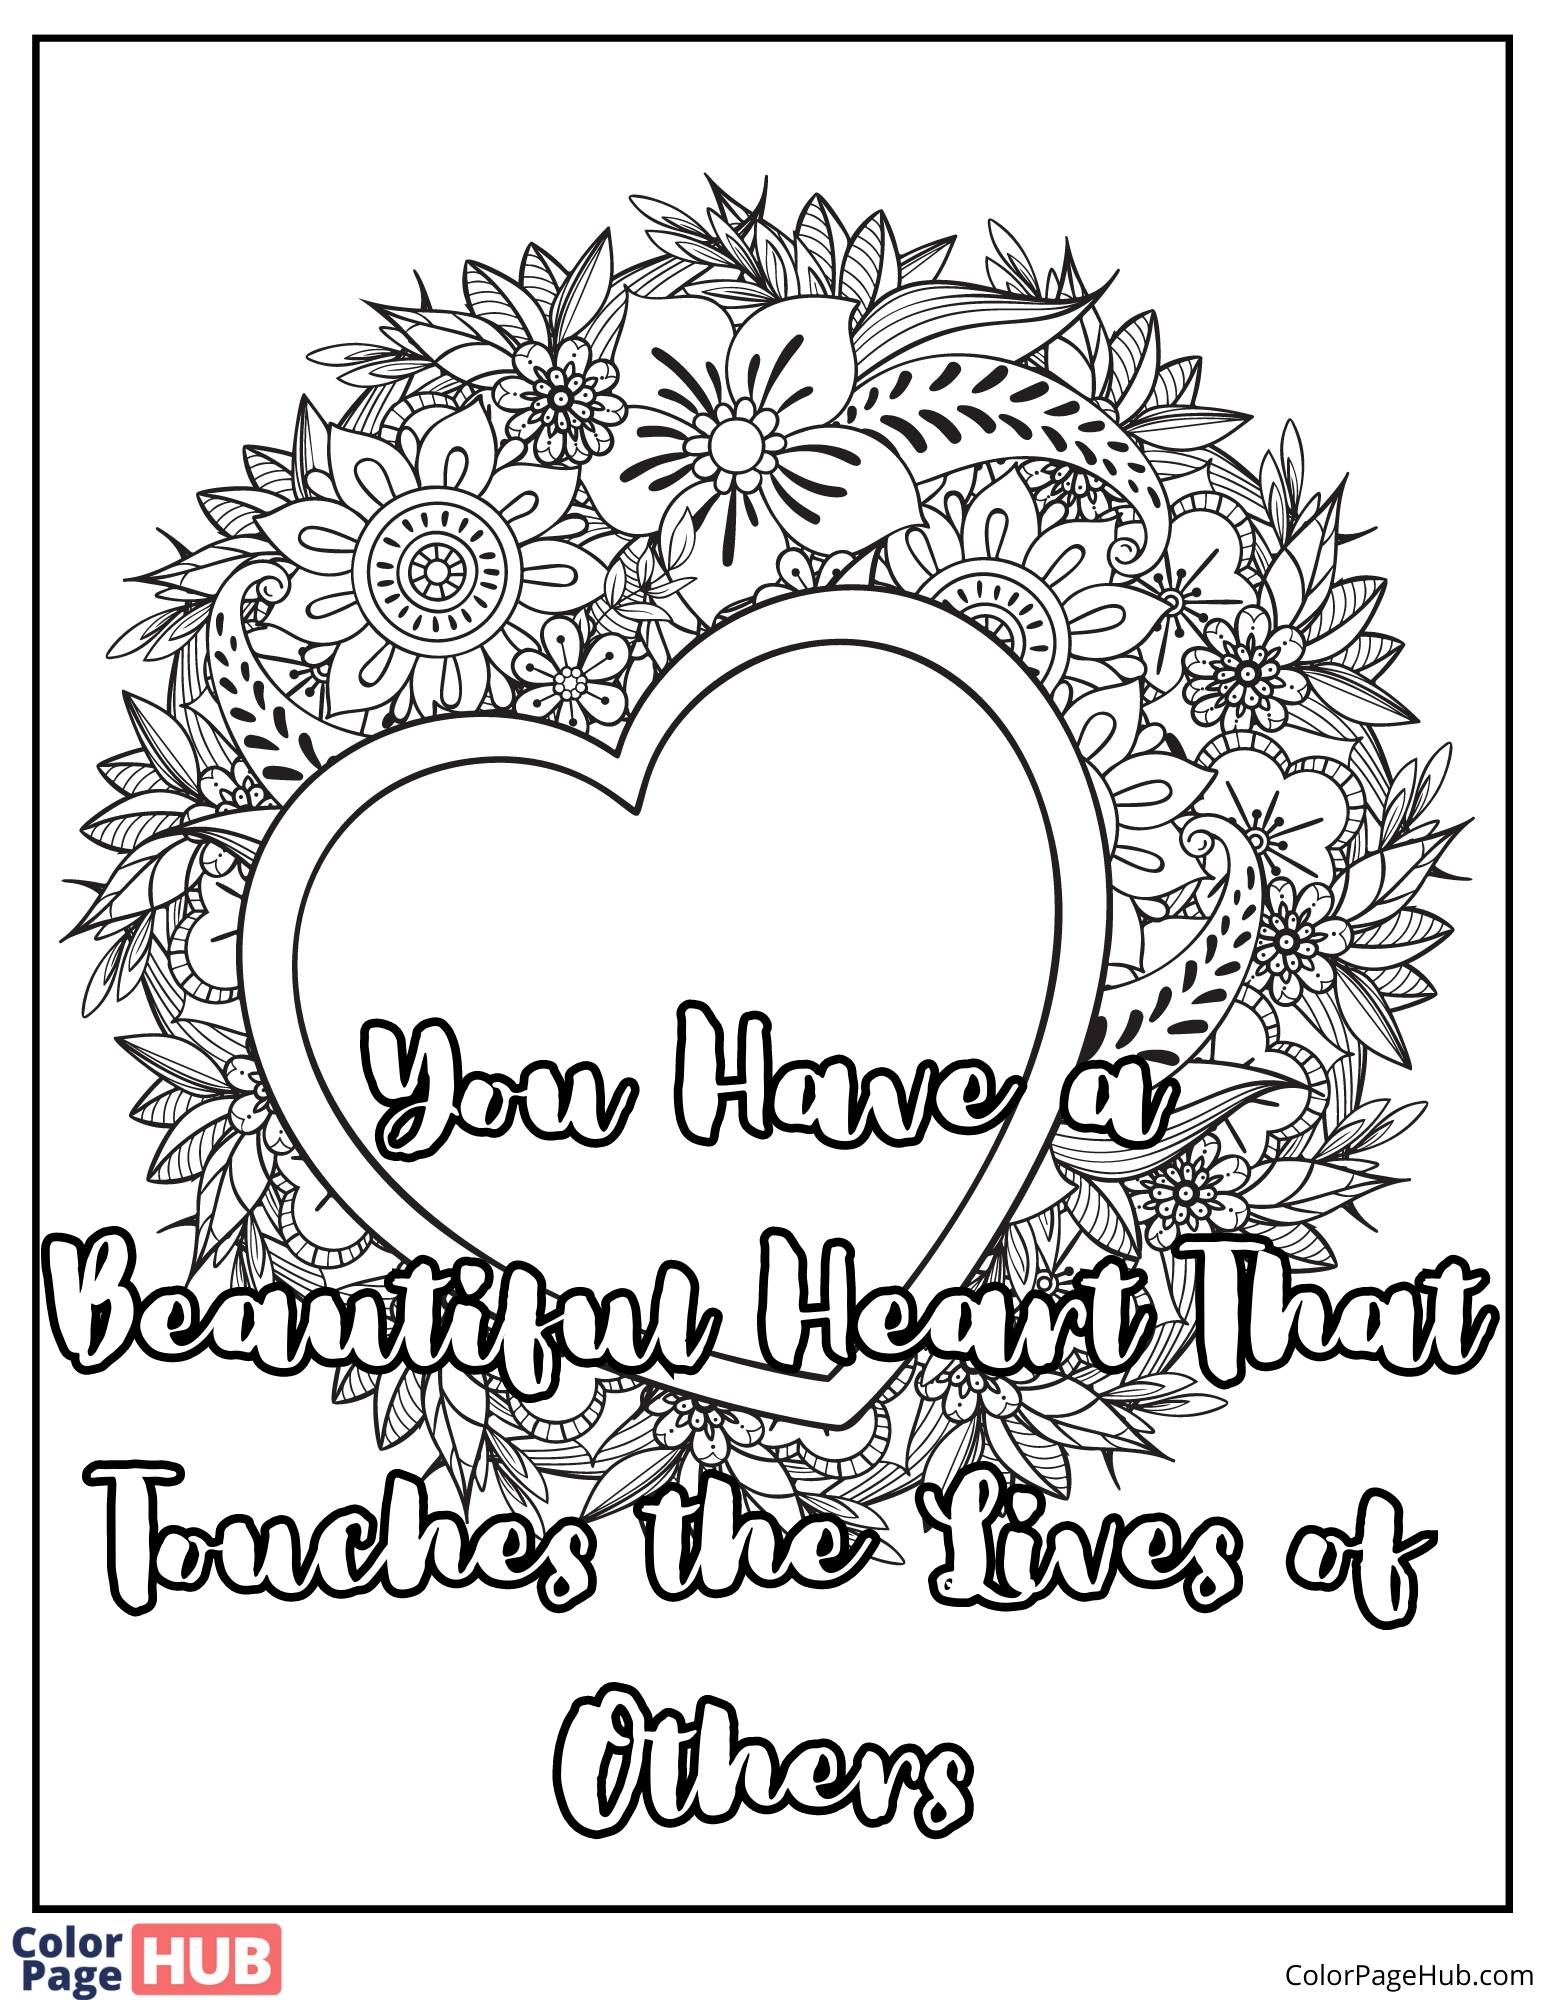 Affirmations coloring pages printable and free